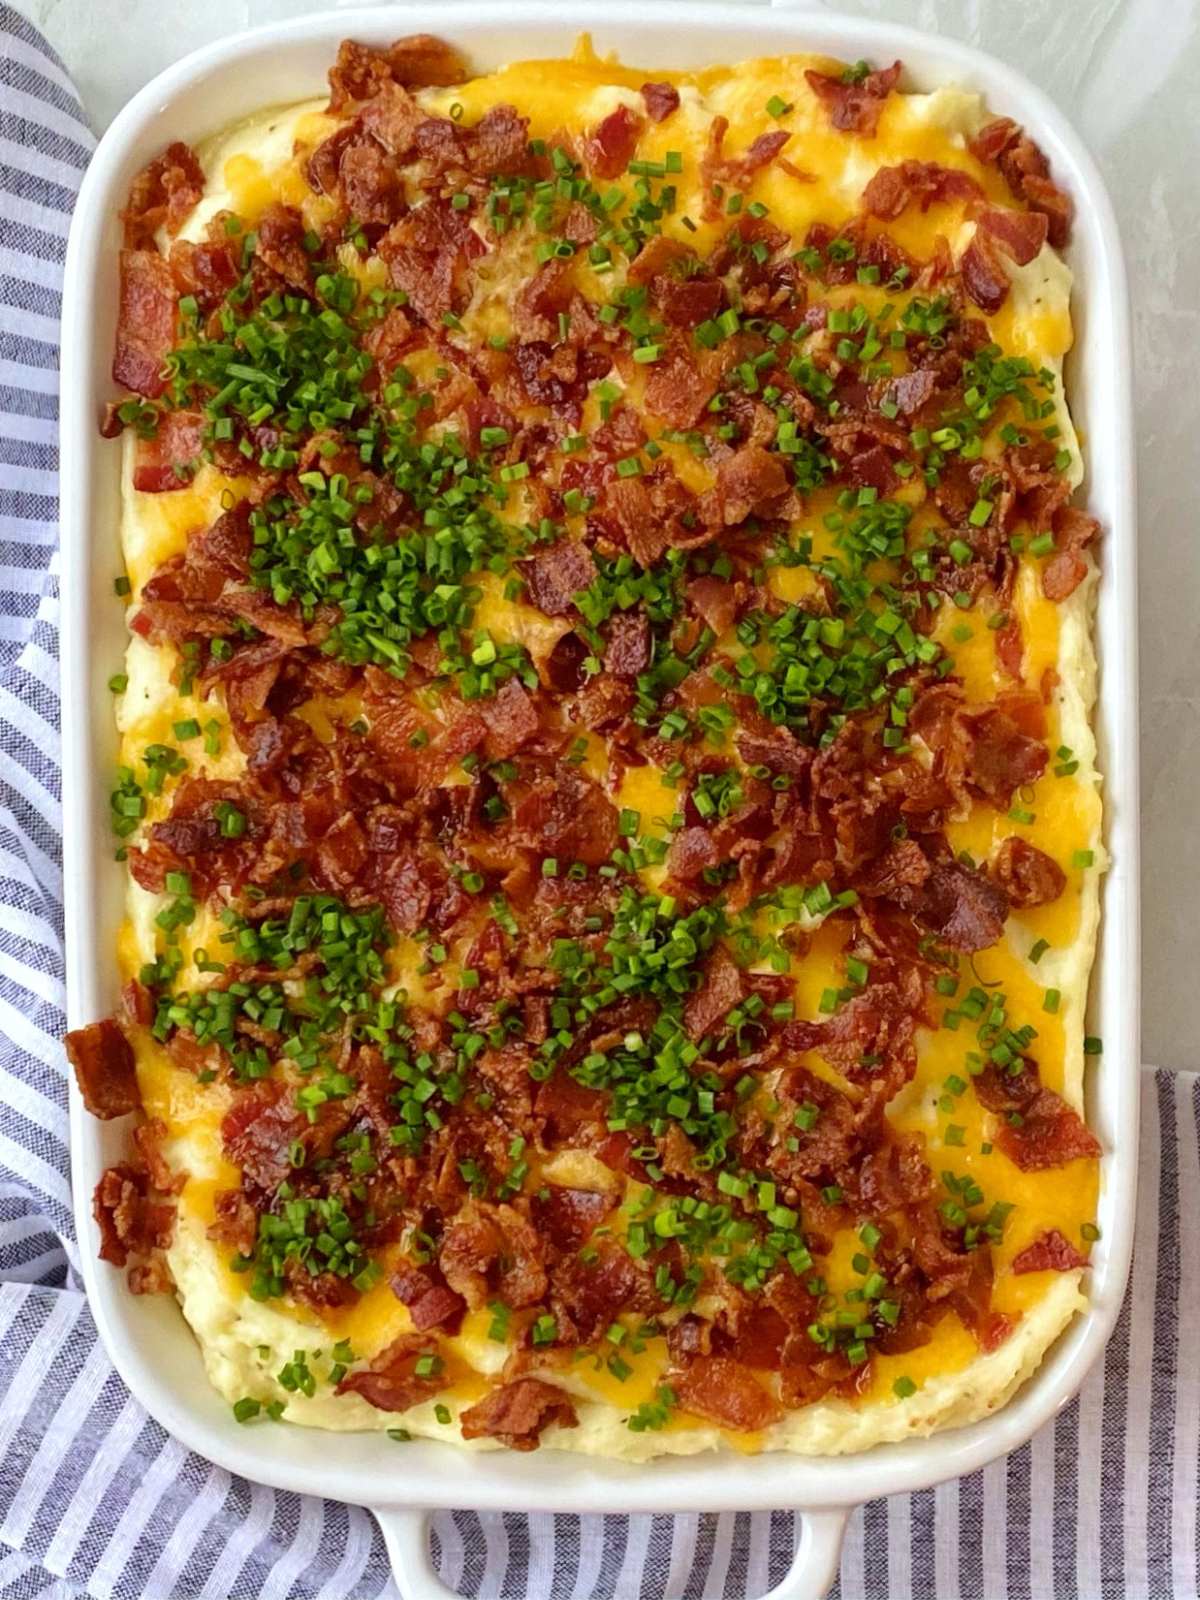 top down shot of baked potato casserole garnished with chives.